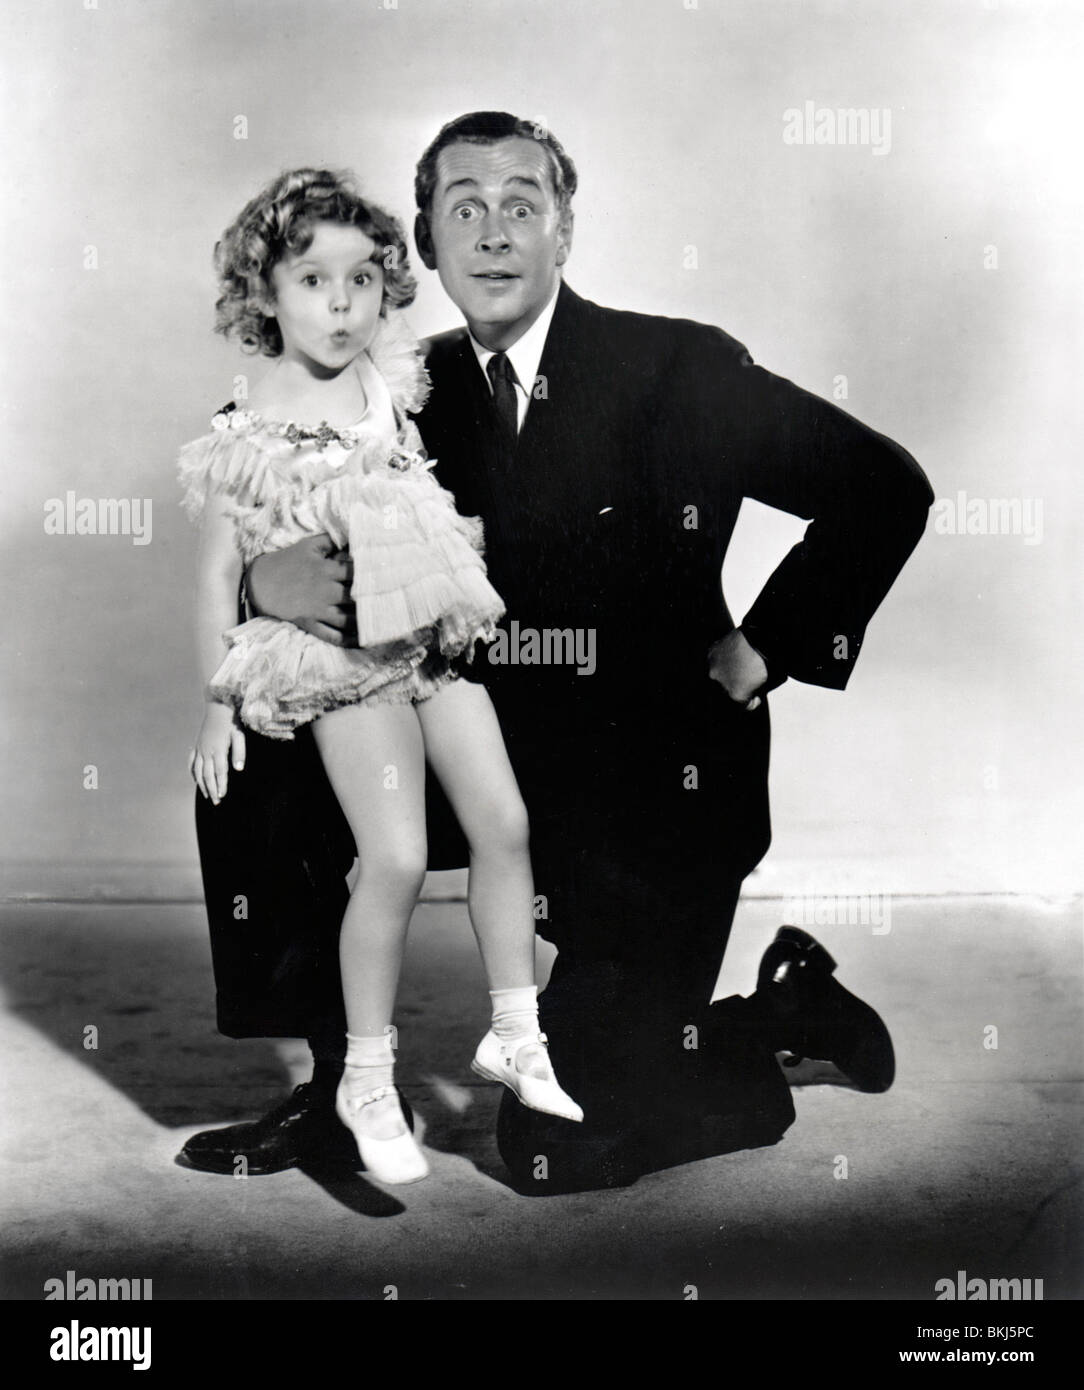 BABY Take A Bow (1934) Shirley Temple, James DUNN BTAB 002 P Banque D'Images